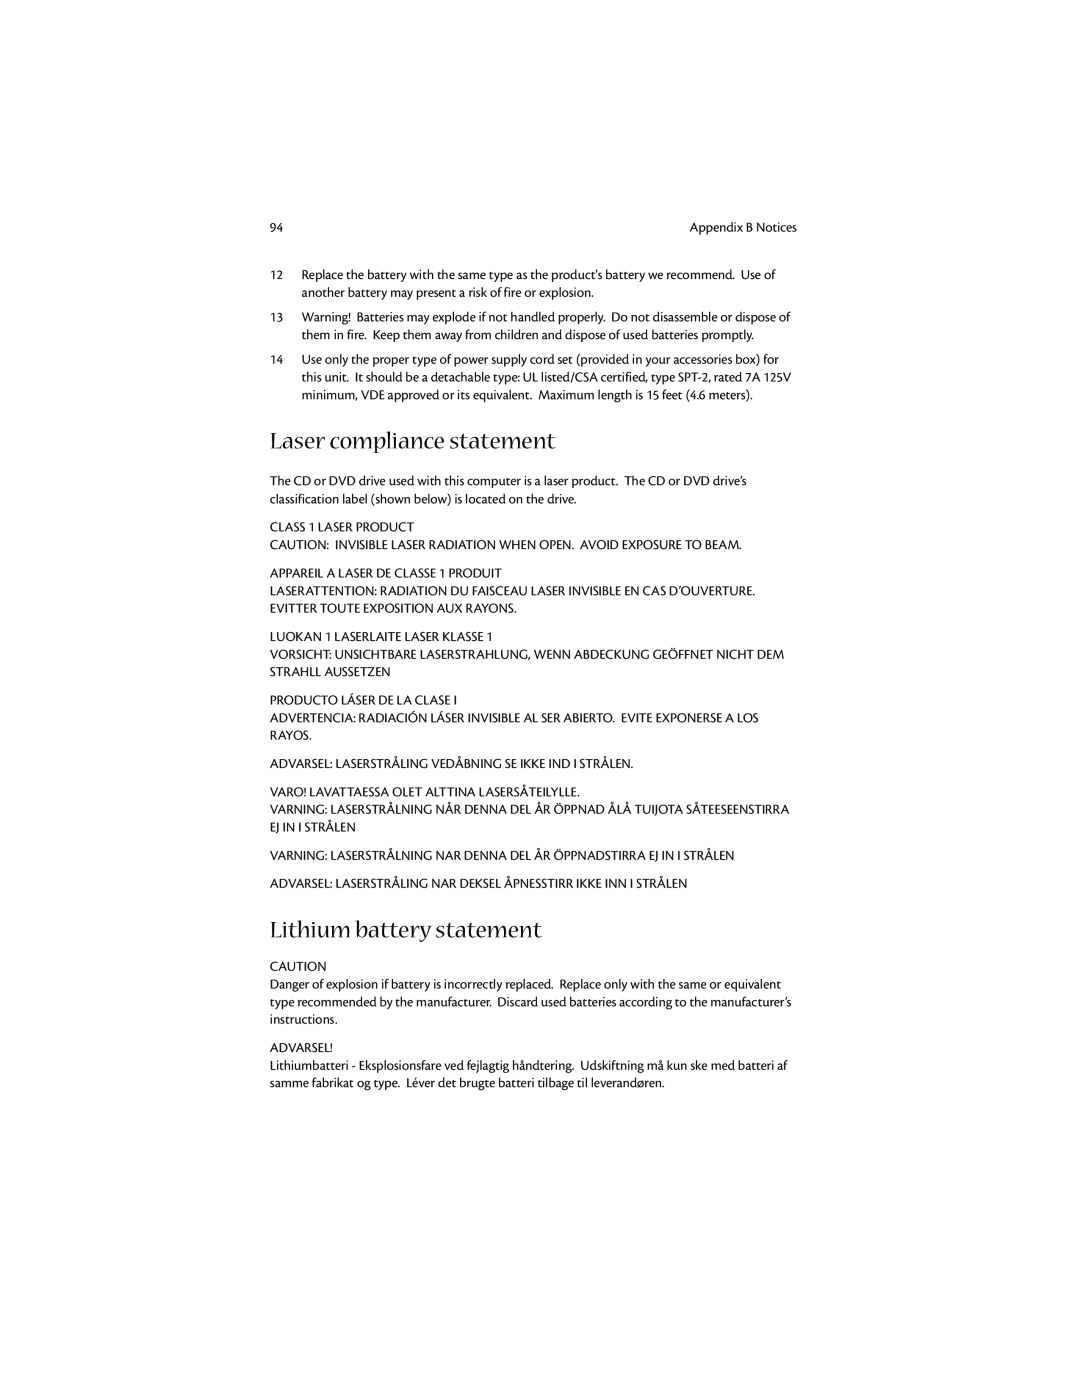 Acer 1400 manual Laser compliance statement, Lithium battery statement 